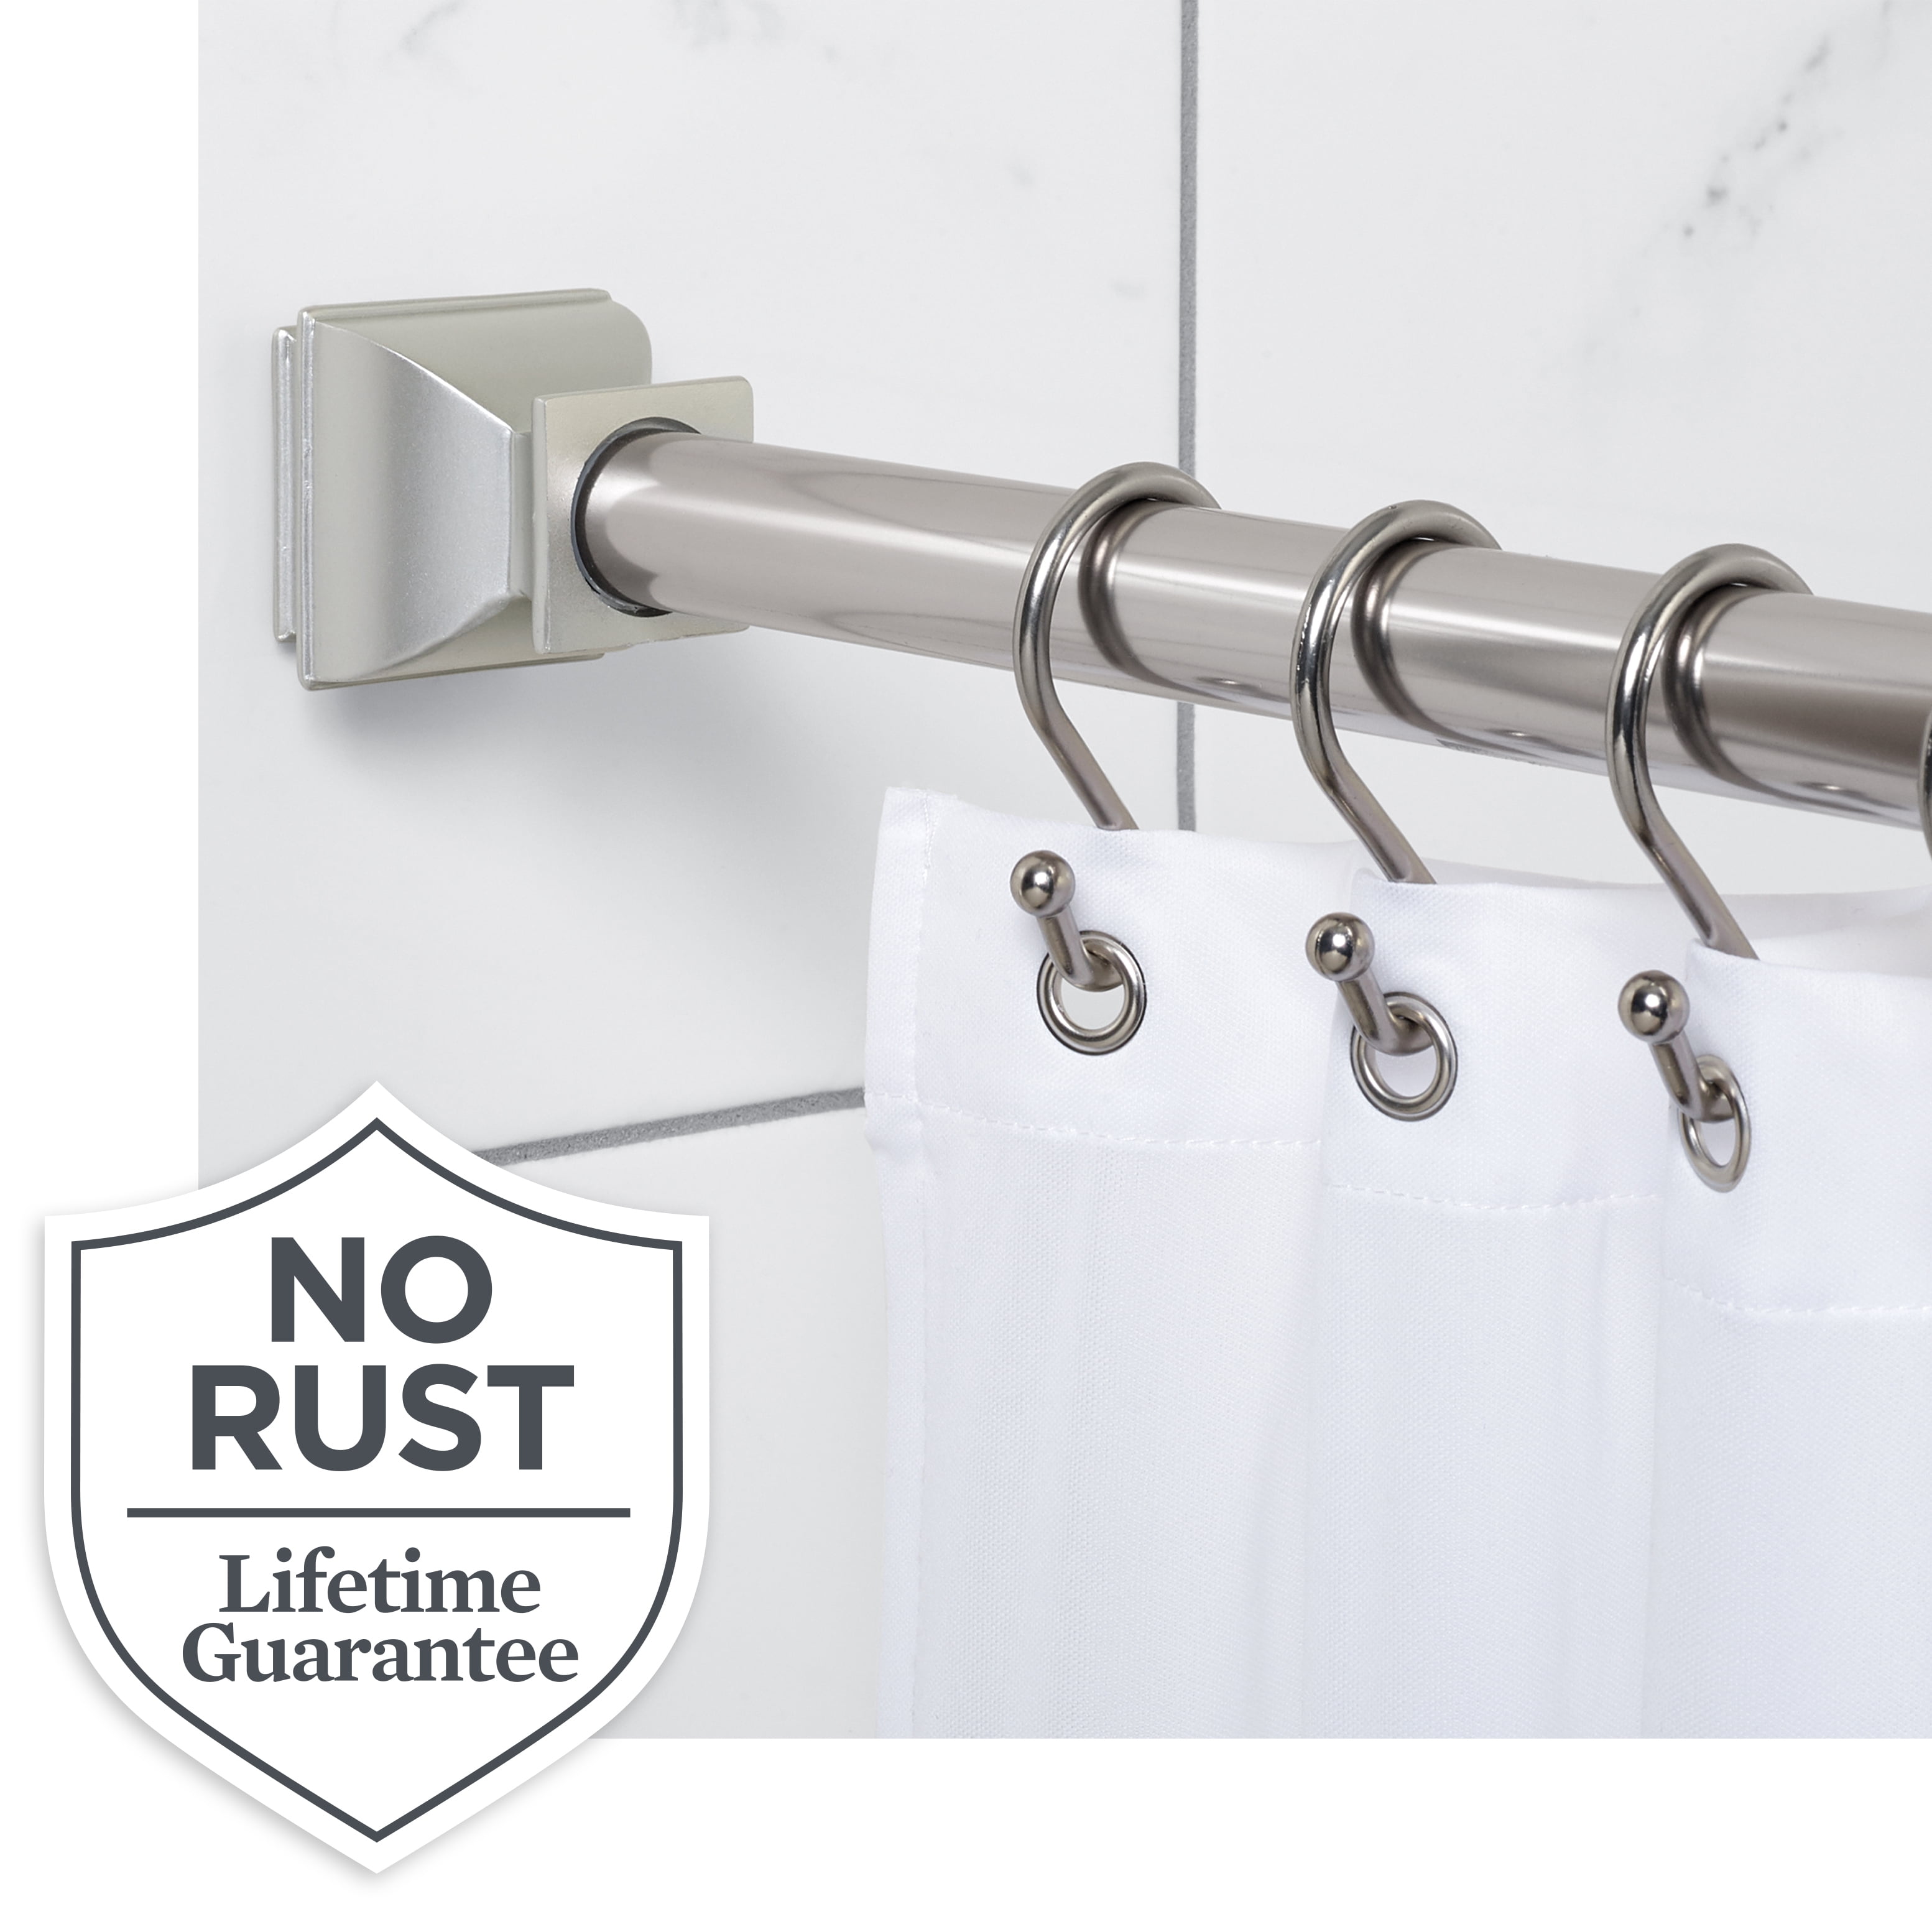 EASY SHOWER CURTAIN HACK! Try raising your shower rod up and